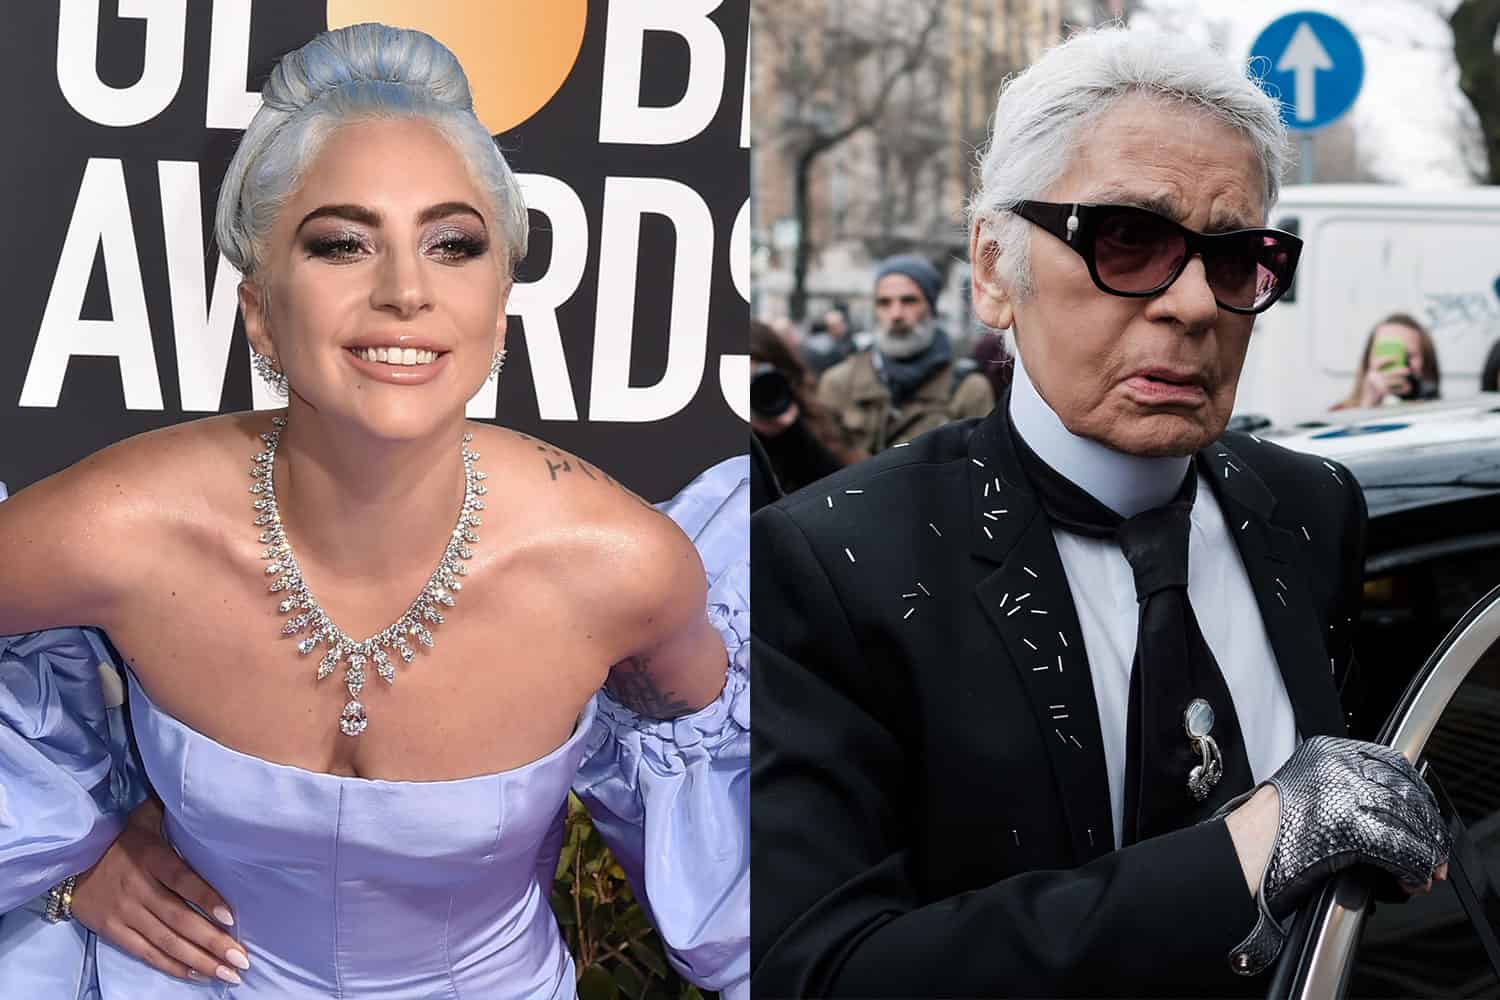 Lady Gaga Nominated for Oscar, Karl Lagerfeld Skips the Chanel Show